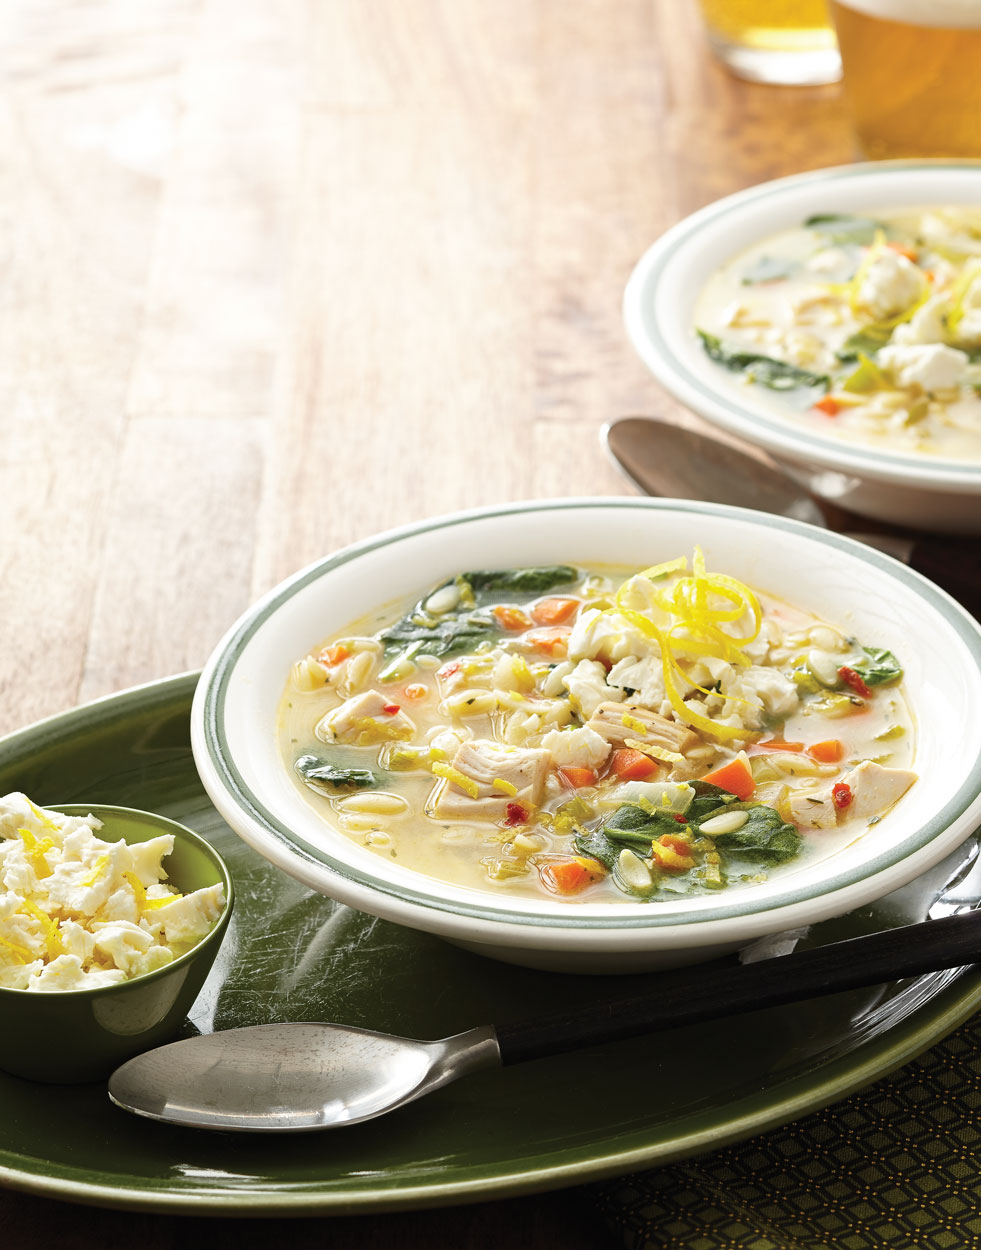 Lemon & Orzo Soup with Spinach and Turkey